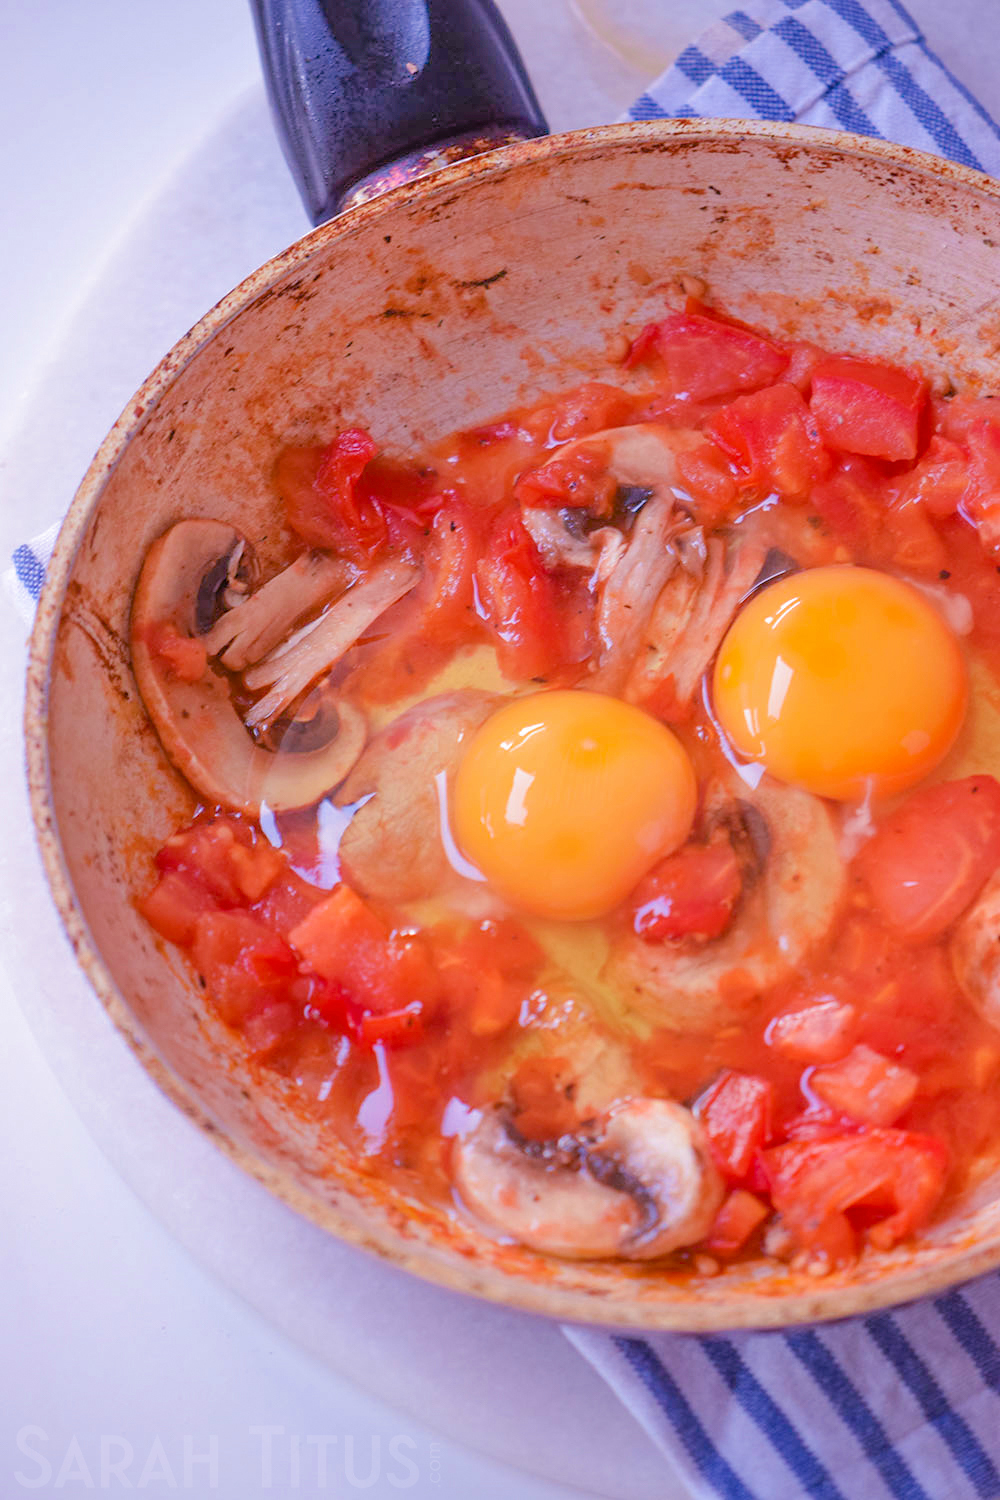 These Italian Eggs are a great take on traditional eggs and is a great addition to your breakfast recipe repertoire.